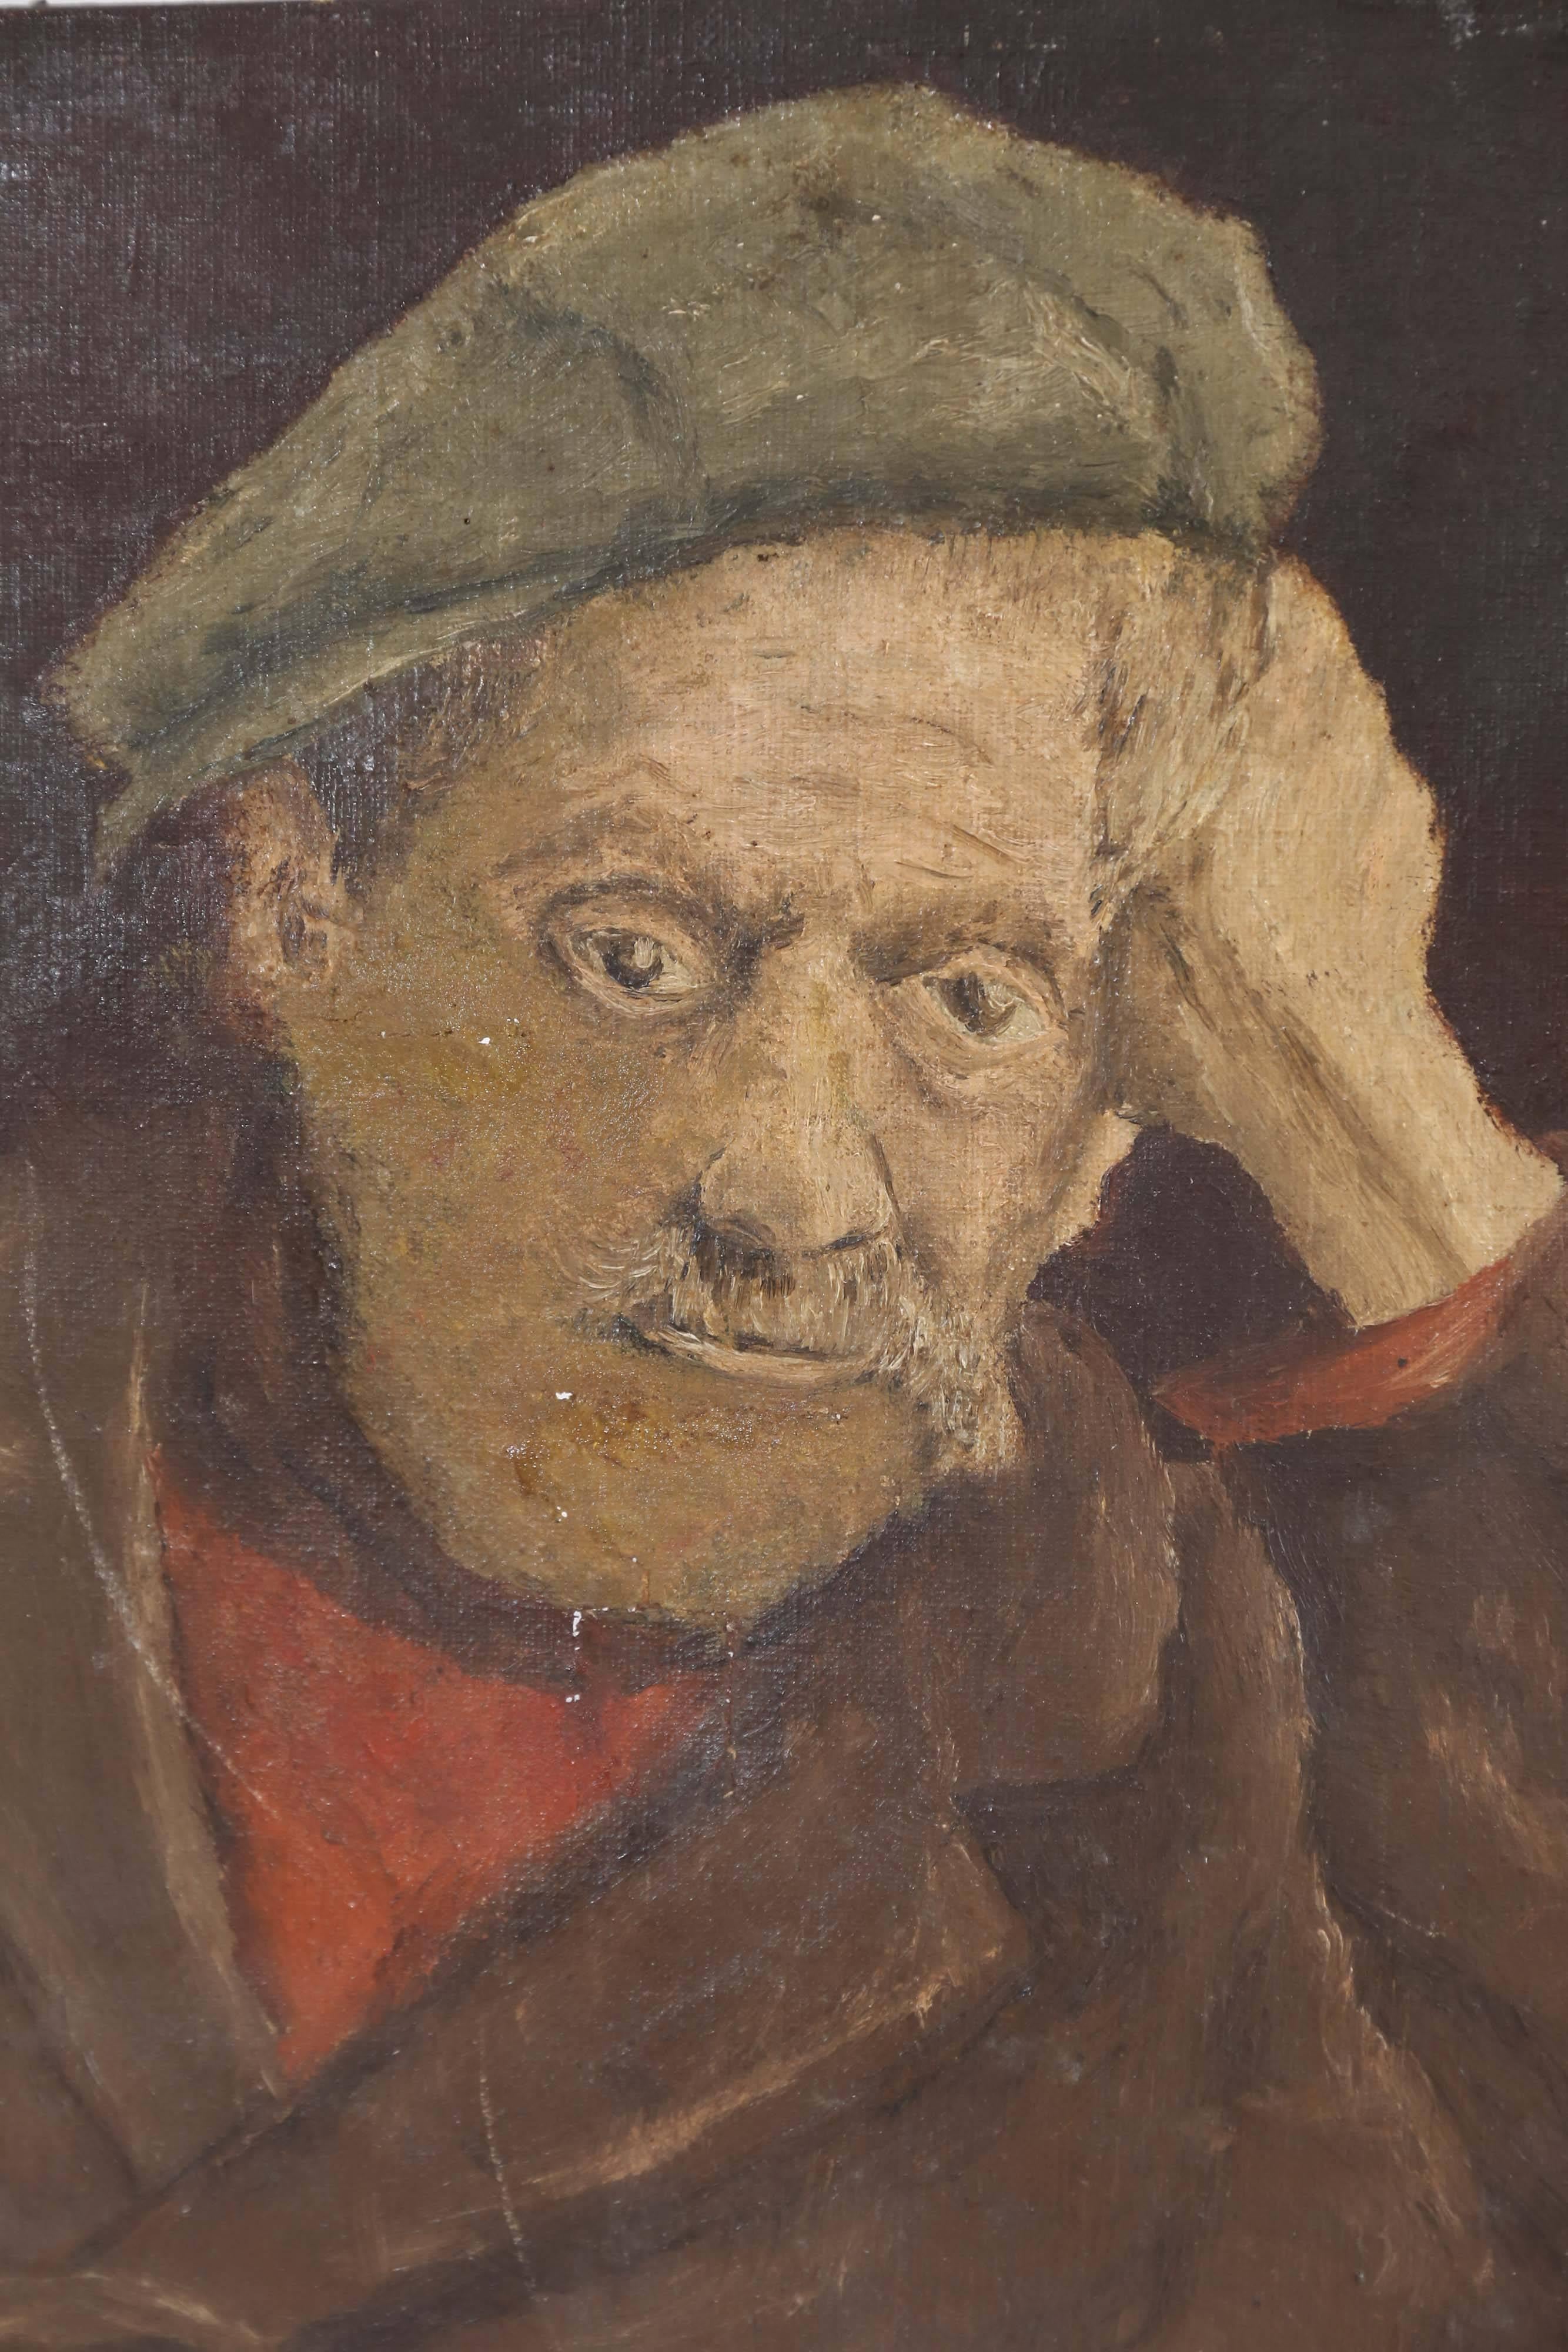 Signed A. Lambert, 1833, an oil on canvas painting of a weary working man from France. The canvas was torn and repaired at some point many years ago which adds a bit of mystery to this dark and thought-provoking piece.